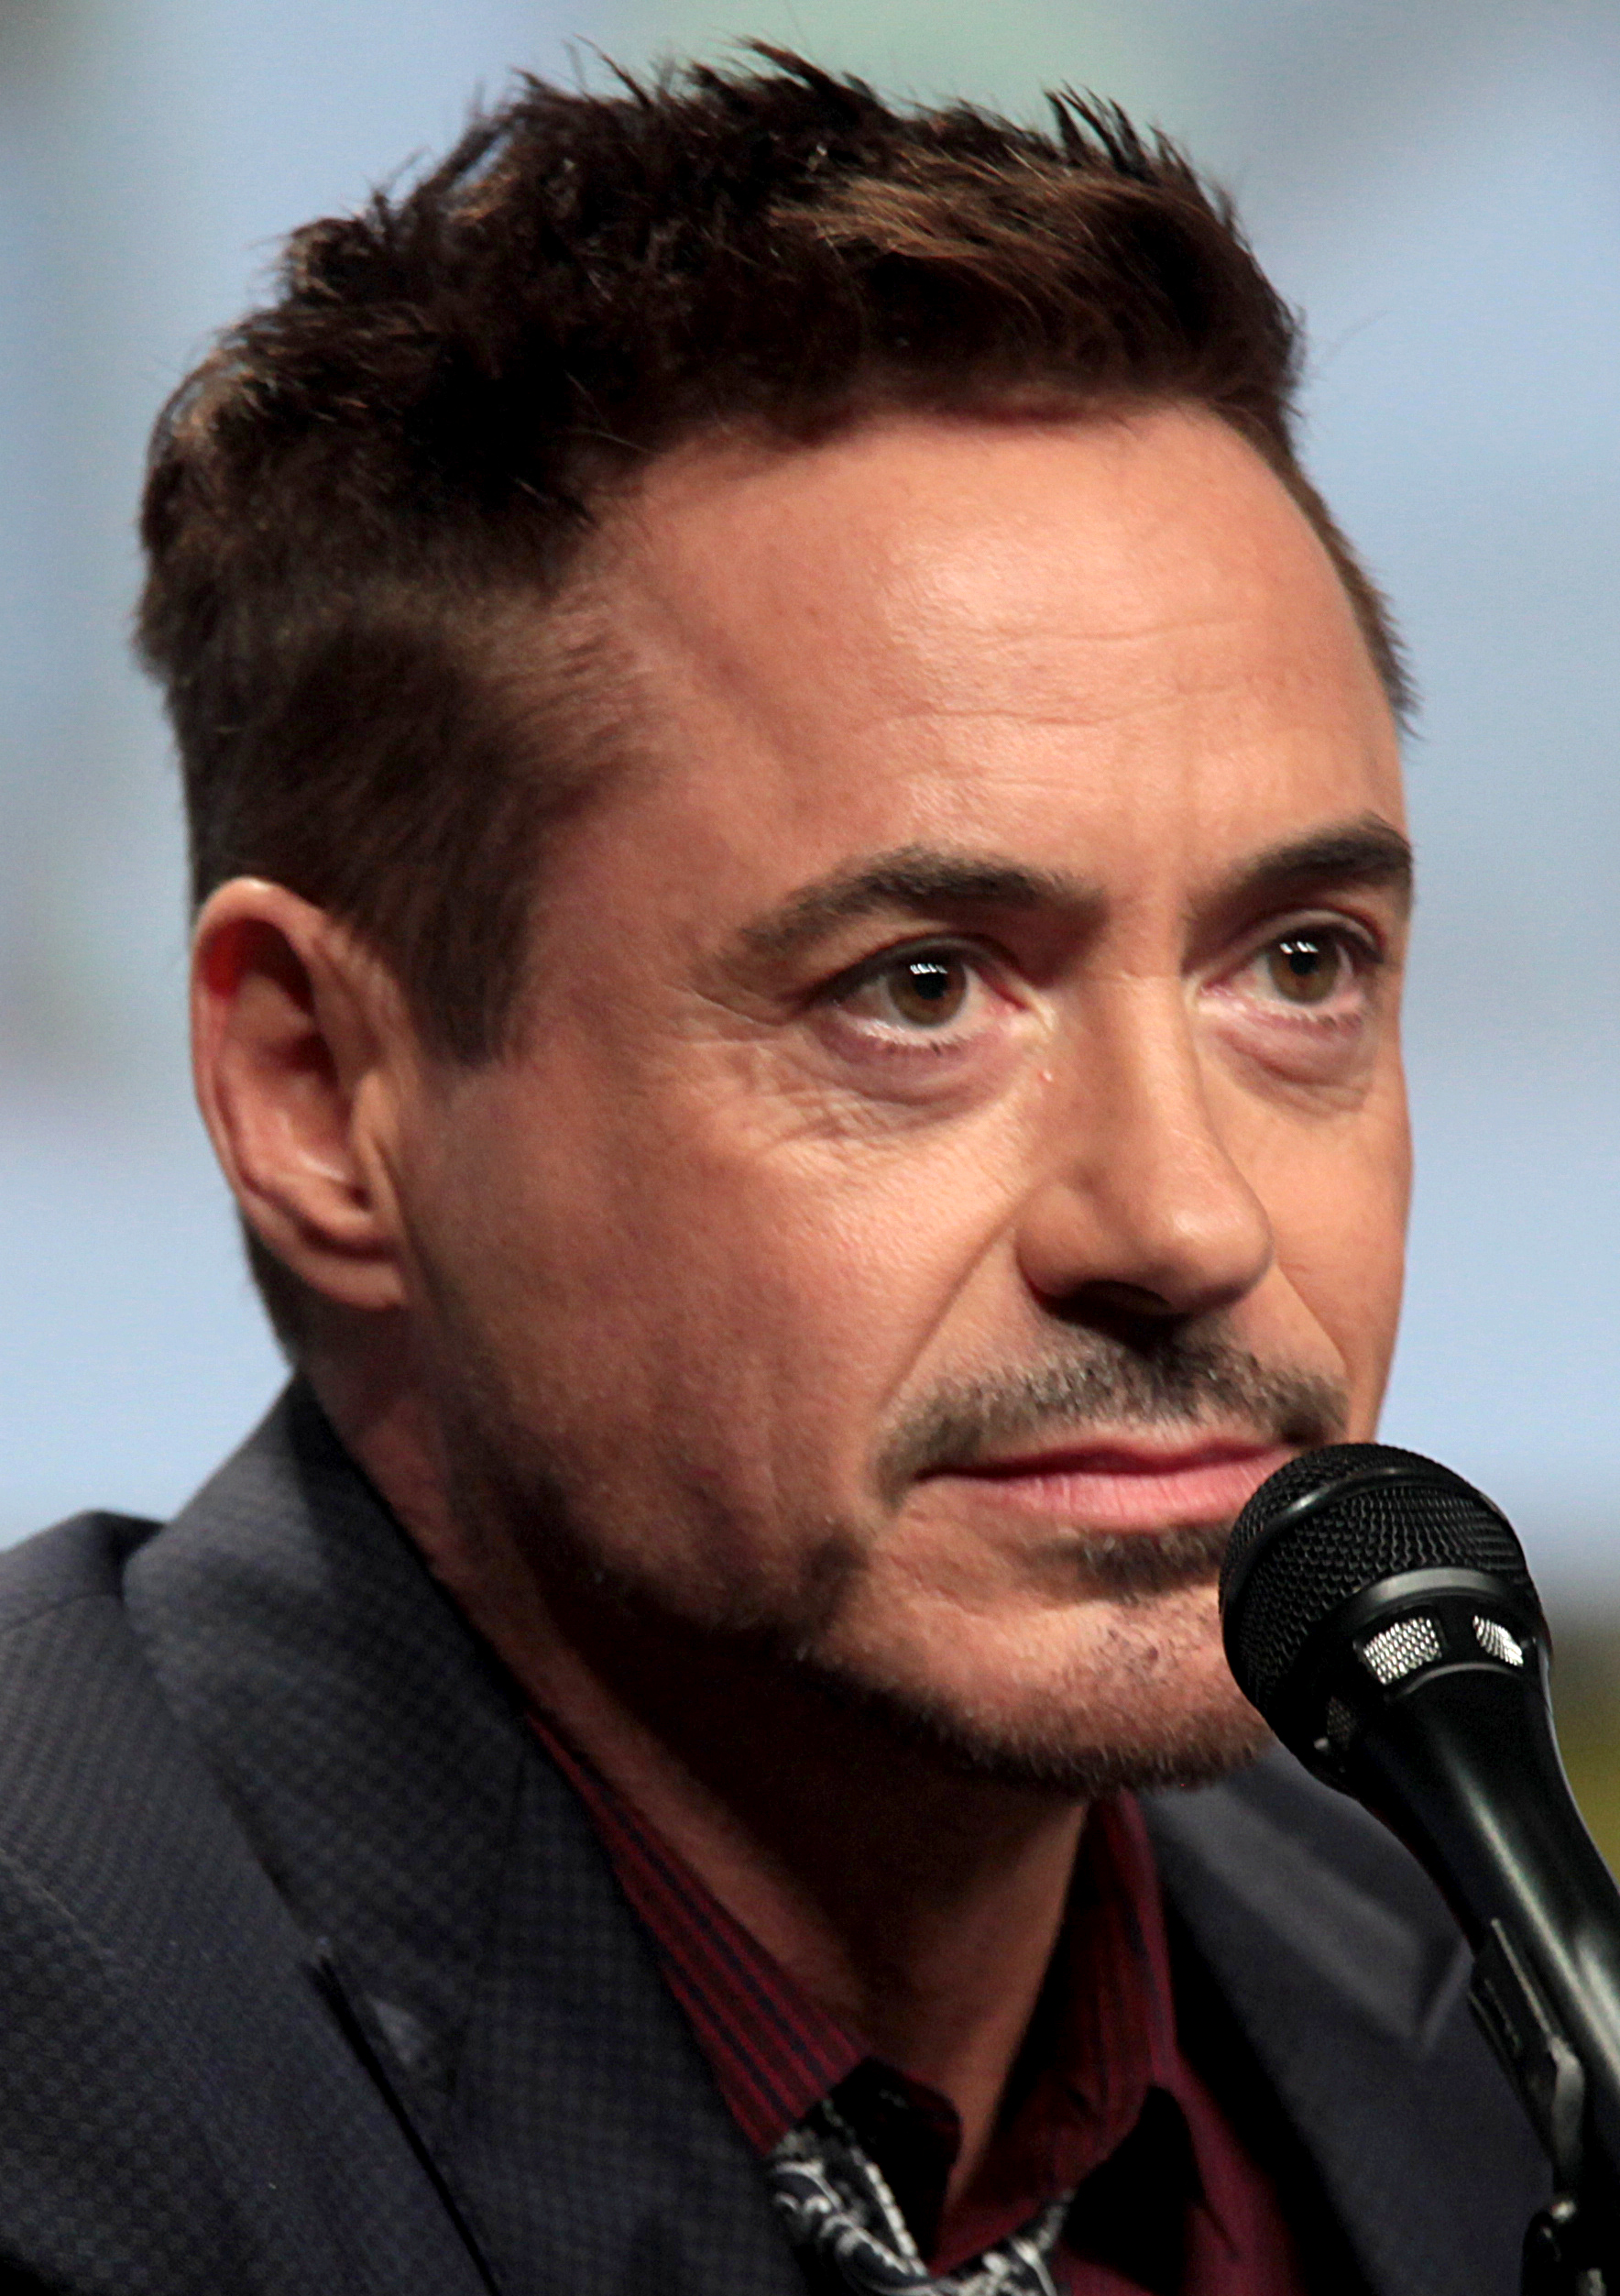 Robert Downey Jr., we were on the same flight.. Super personable, witty. I didn’t realize it was him at first.